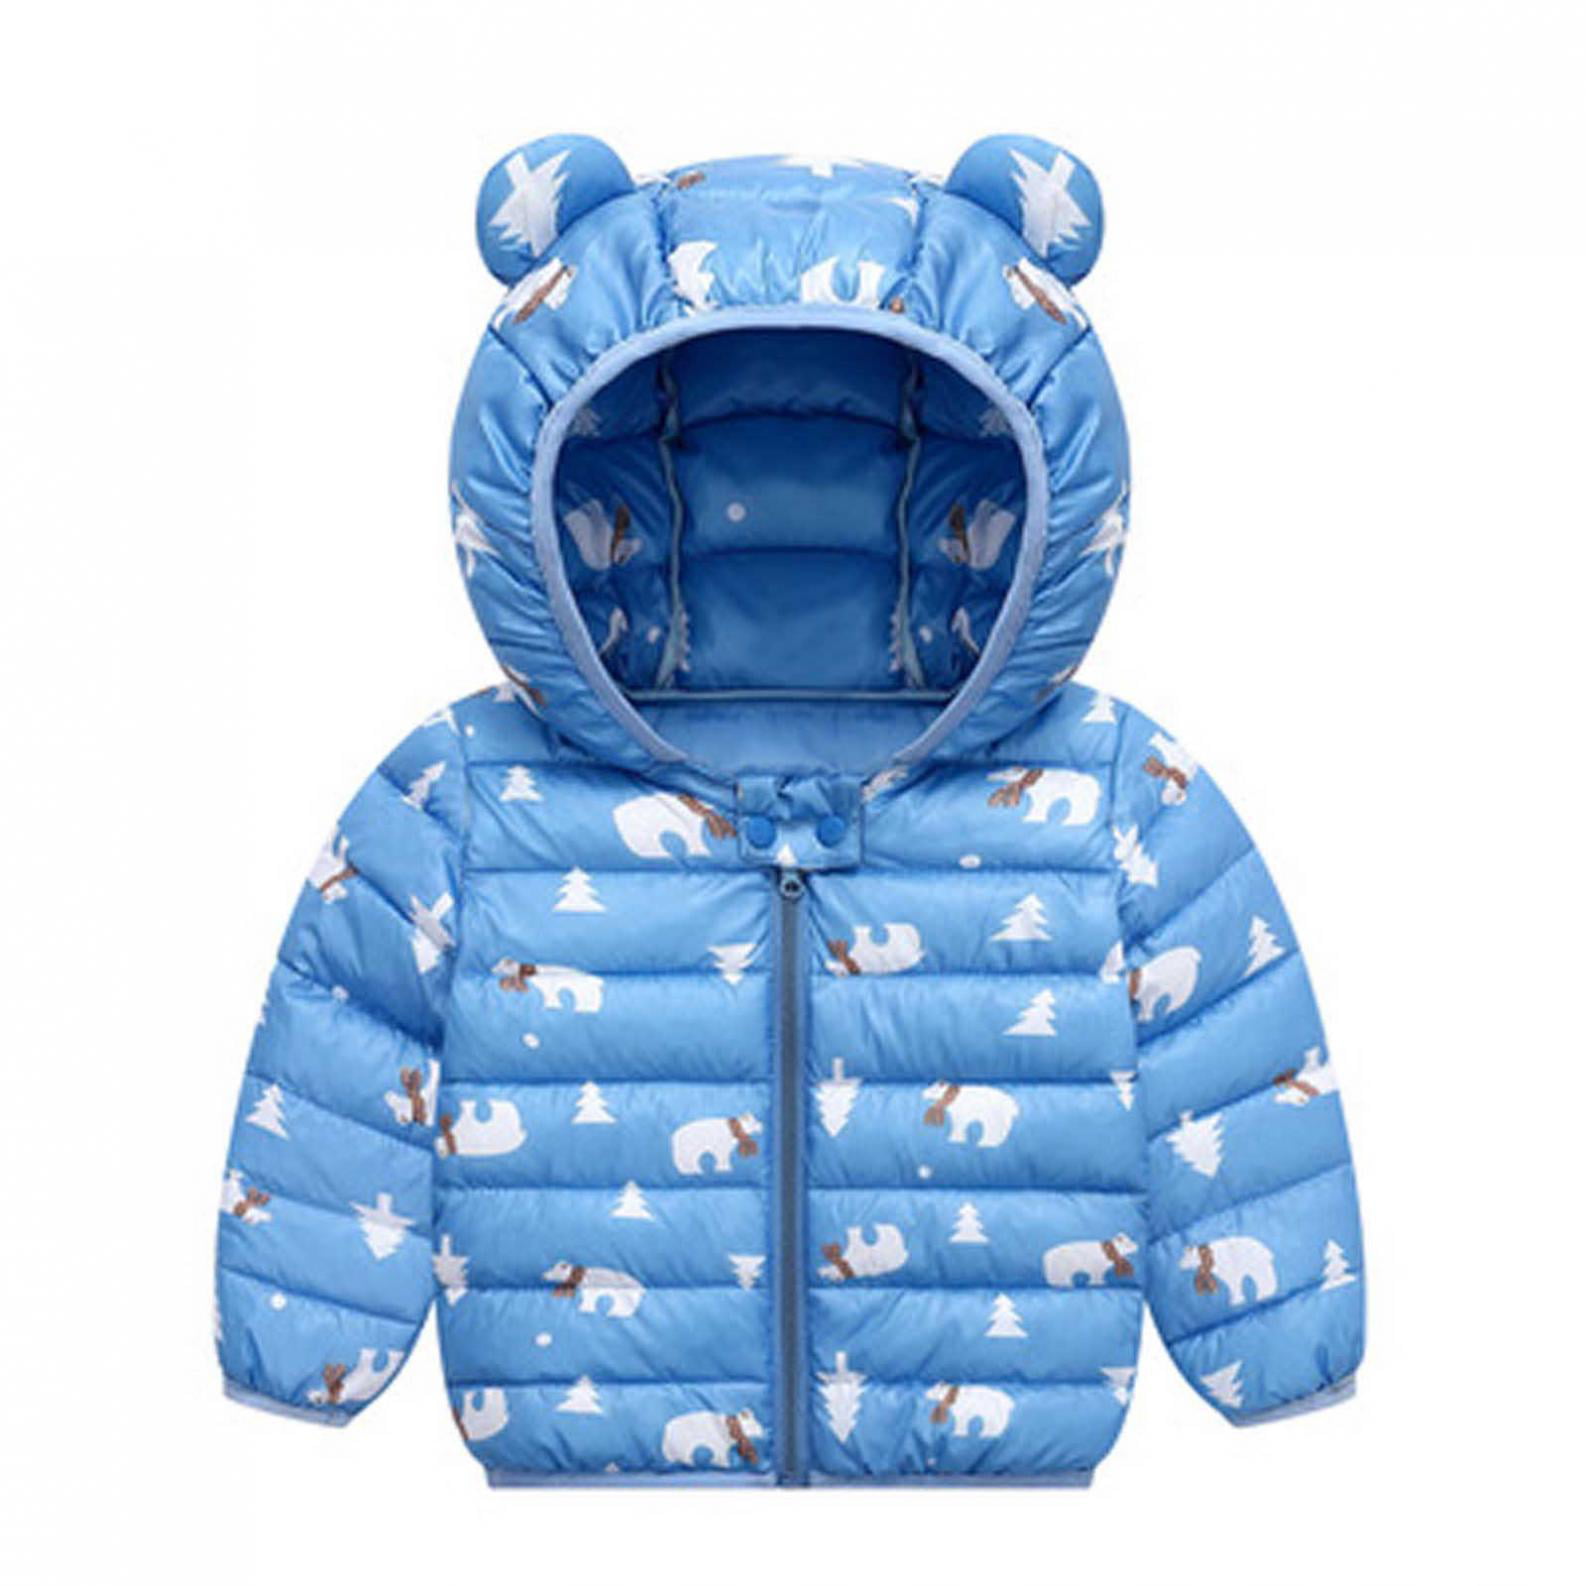 waitFOR Toddlers Kids Solid Bear Ear Hoodies Down Jacket Baby Boys Girls Casual Long Sleeve Thick Windproof Coat Hoody Windbreaker Zipper Tops Wadded Coat Padded Outwear,Suit for 6 Months to 4 Years